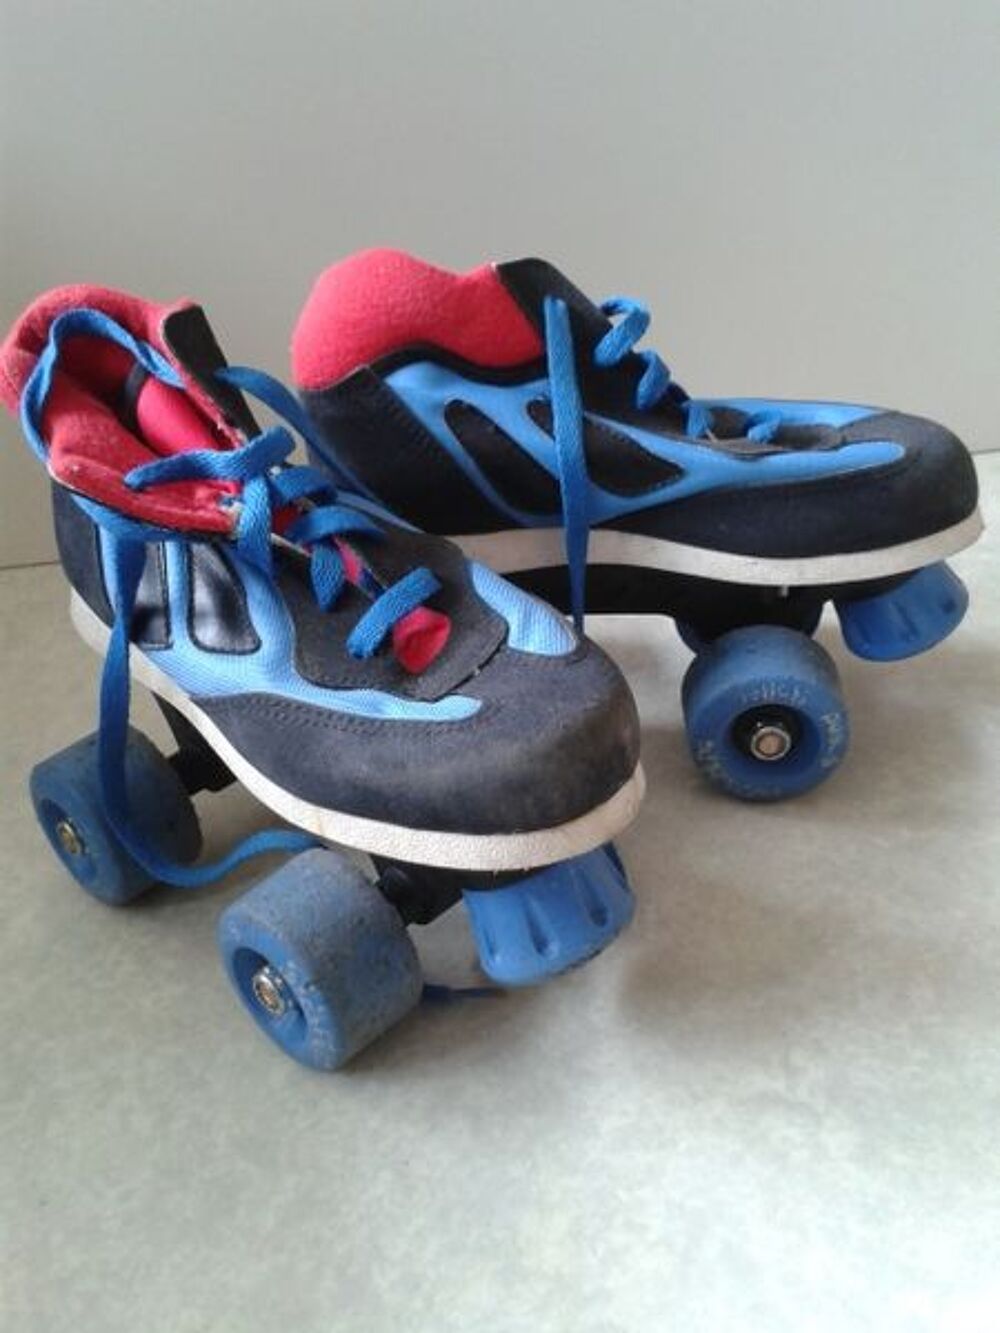 STAMM Speed Roller - PATINS A ROULETTES - T31 - Sports